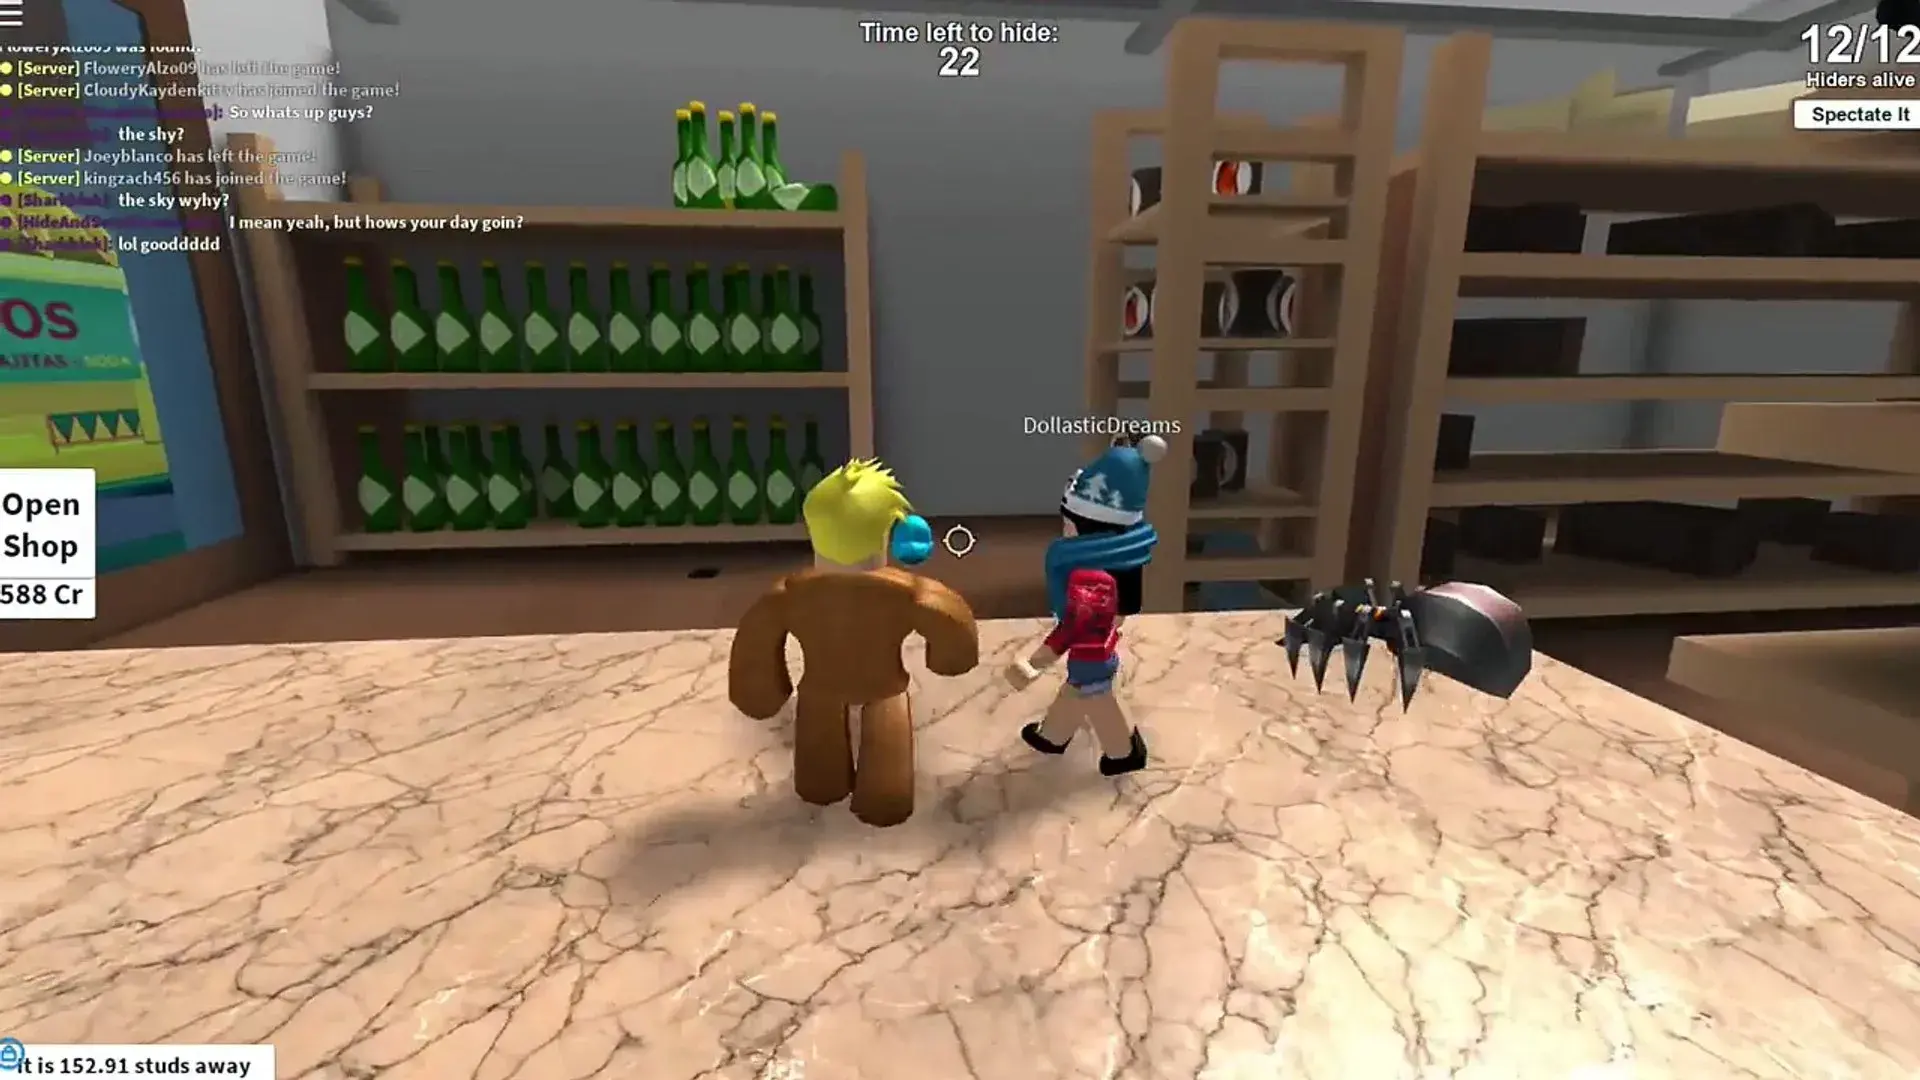 How To Hide Games Played In Roblox 